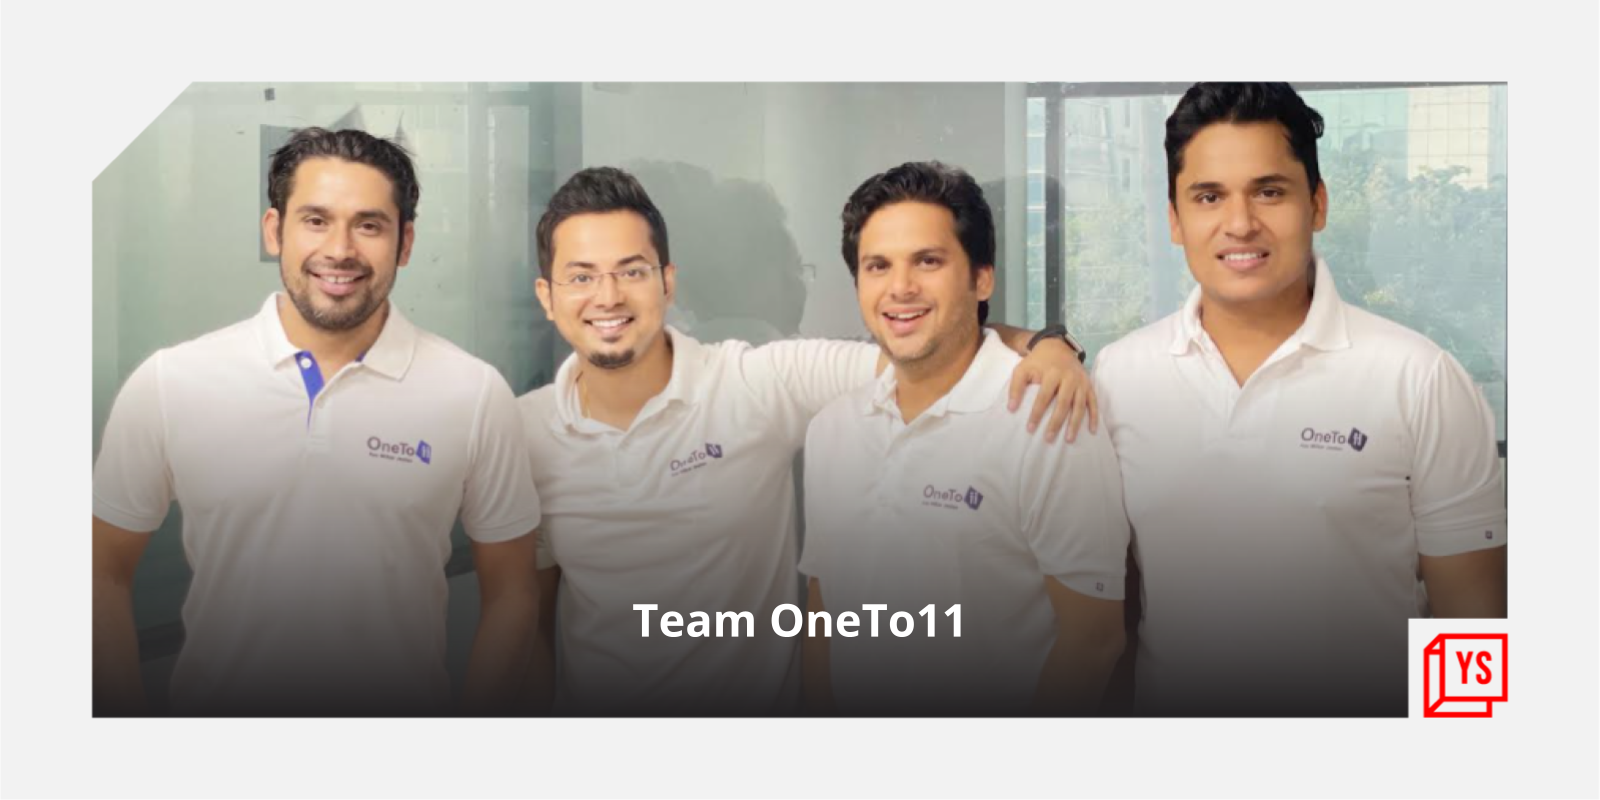 [YS Exclusive] Blockchain gaming startup OneTo11 raises $2.5M in seed round